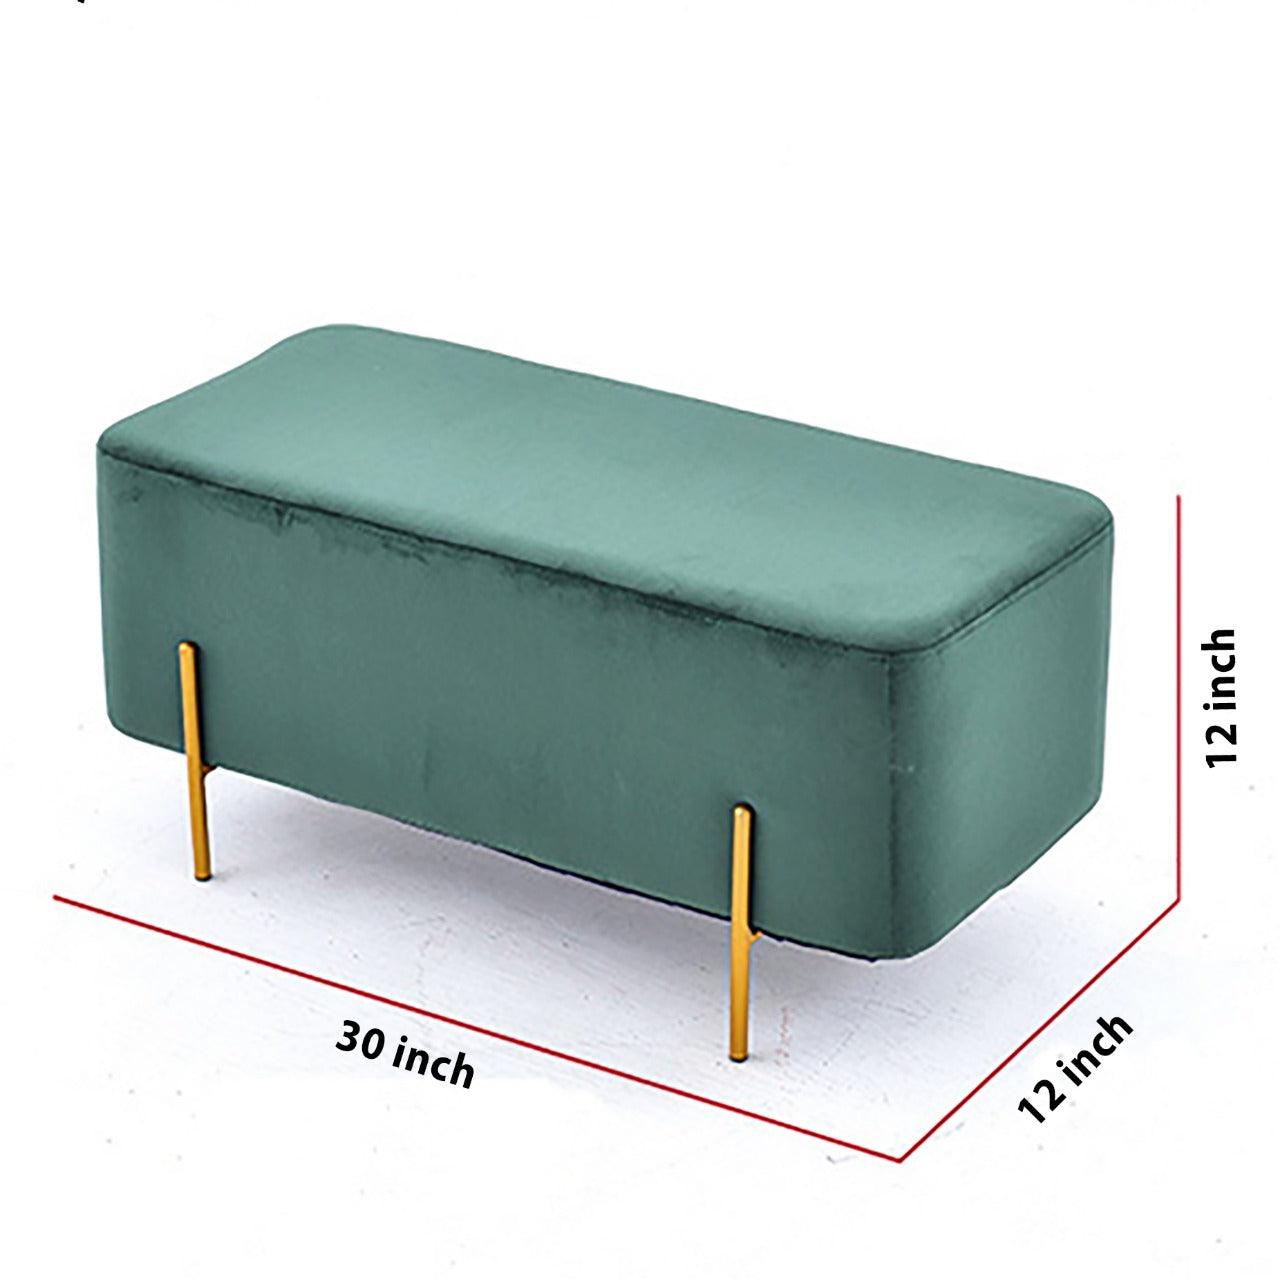 Wooden stool 2 Seater With Steel Stand - 169 - 92Bedding